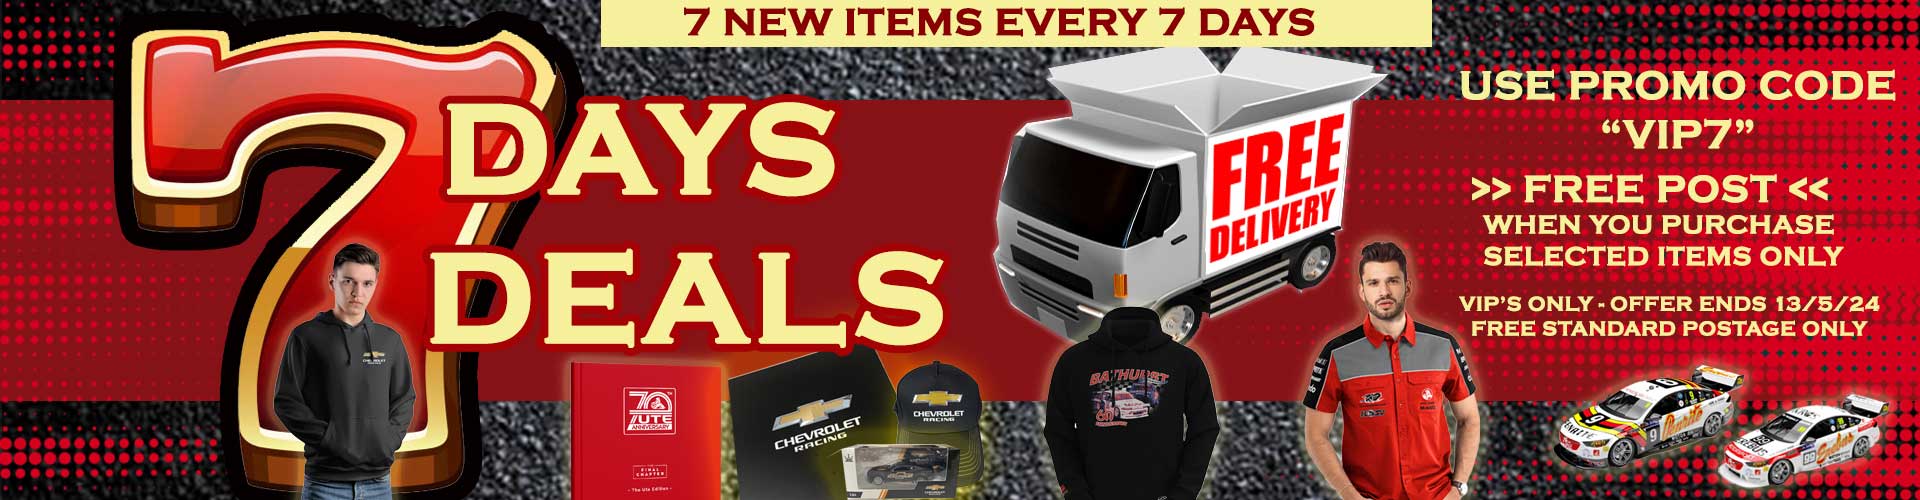 NEW 7 ITEMS EVERY 7 DAYS